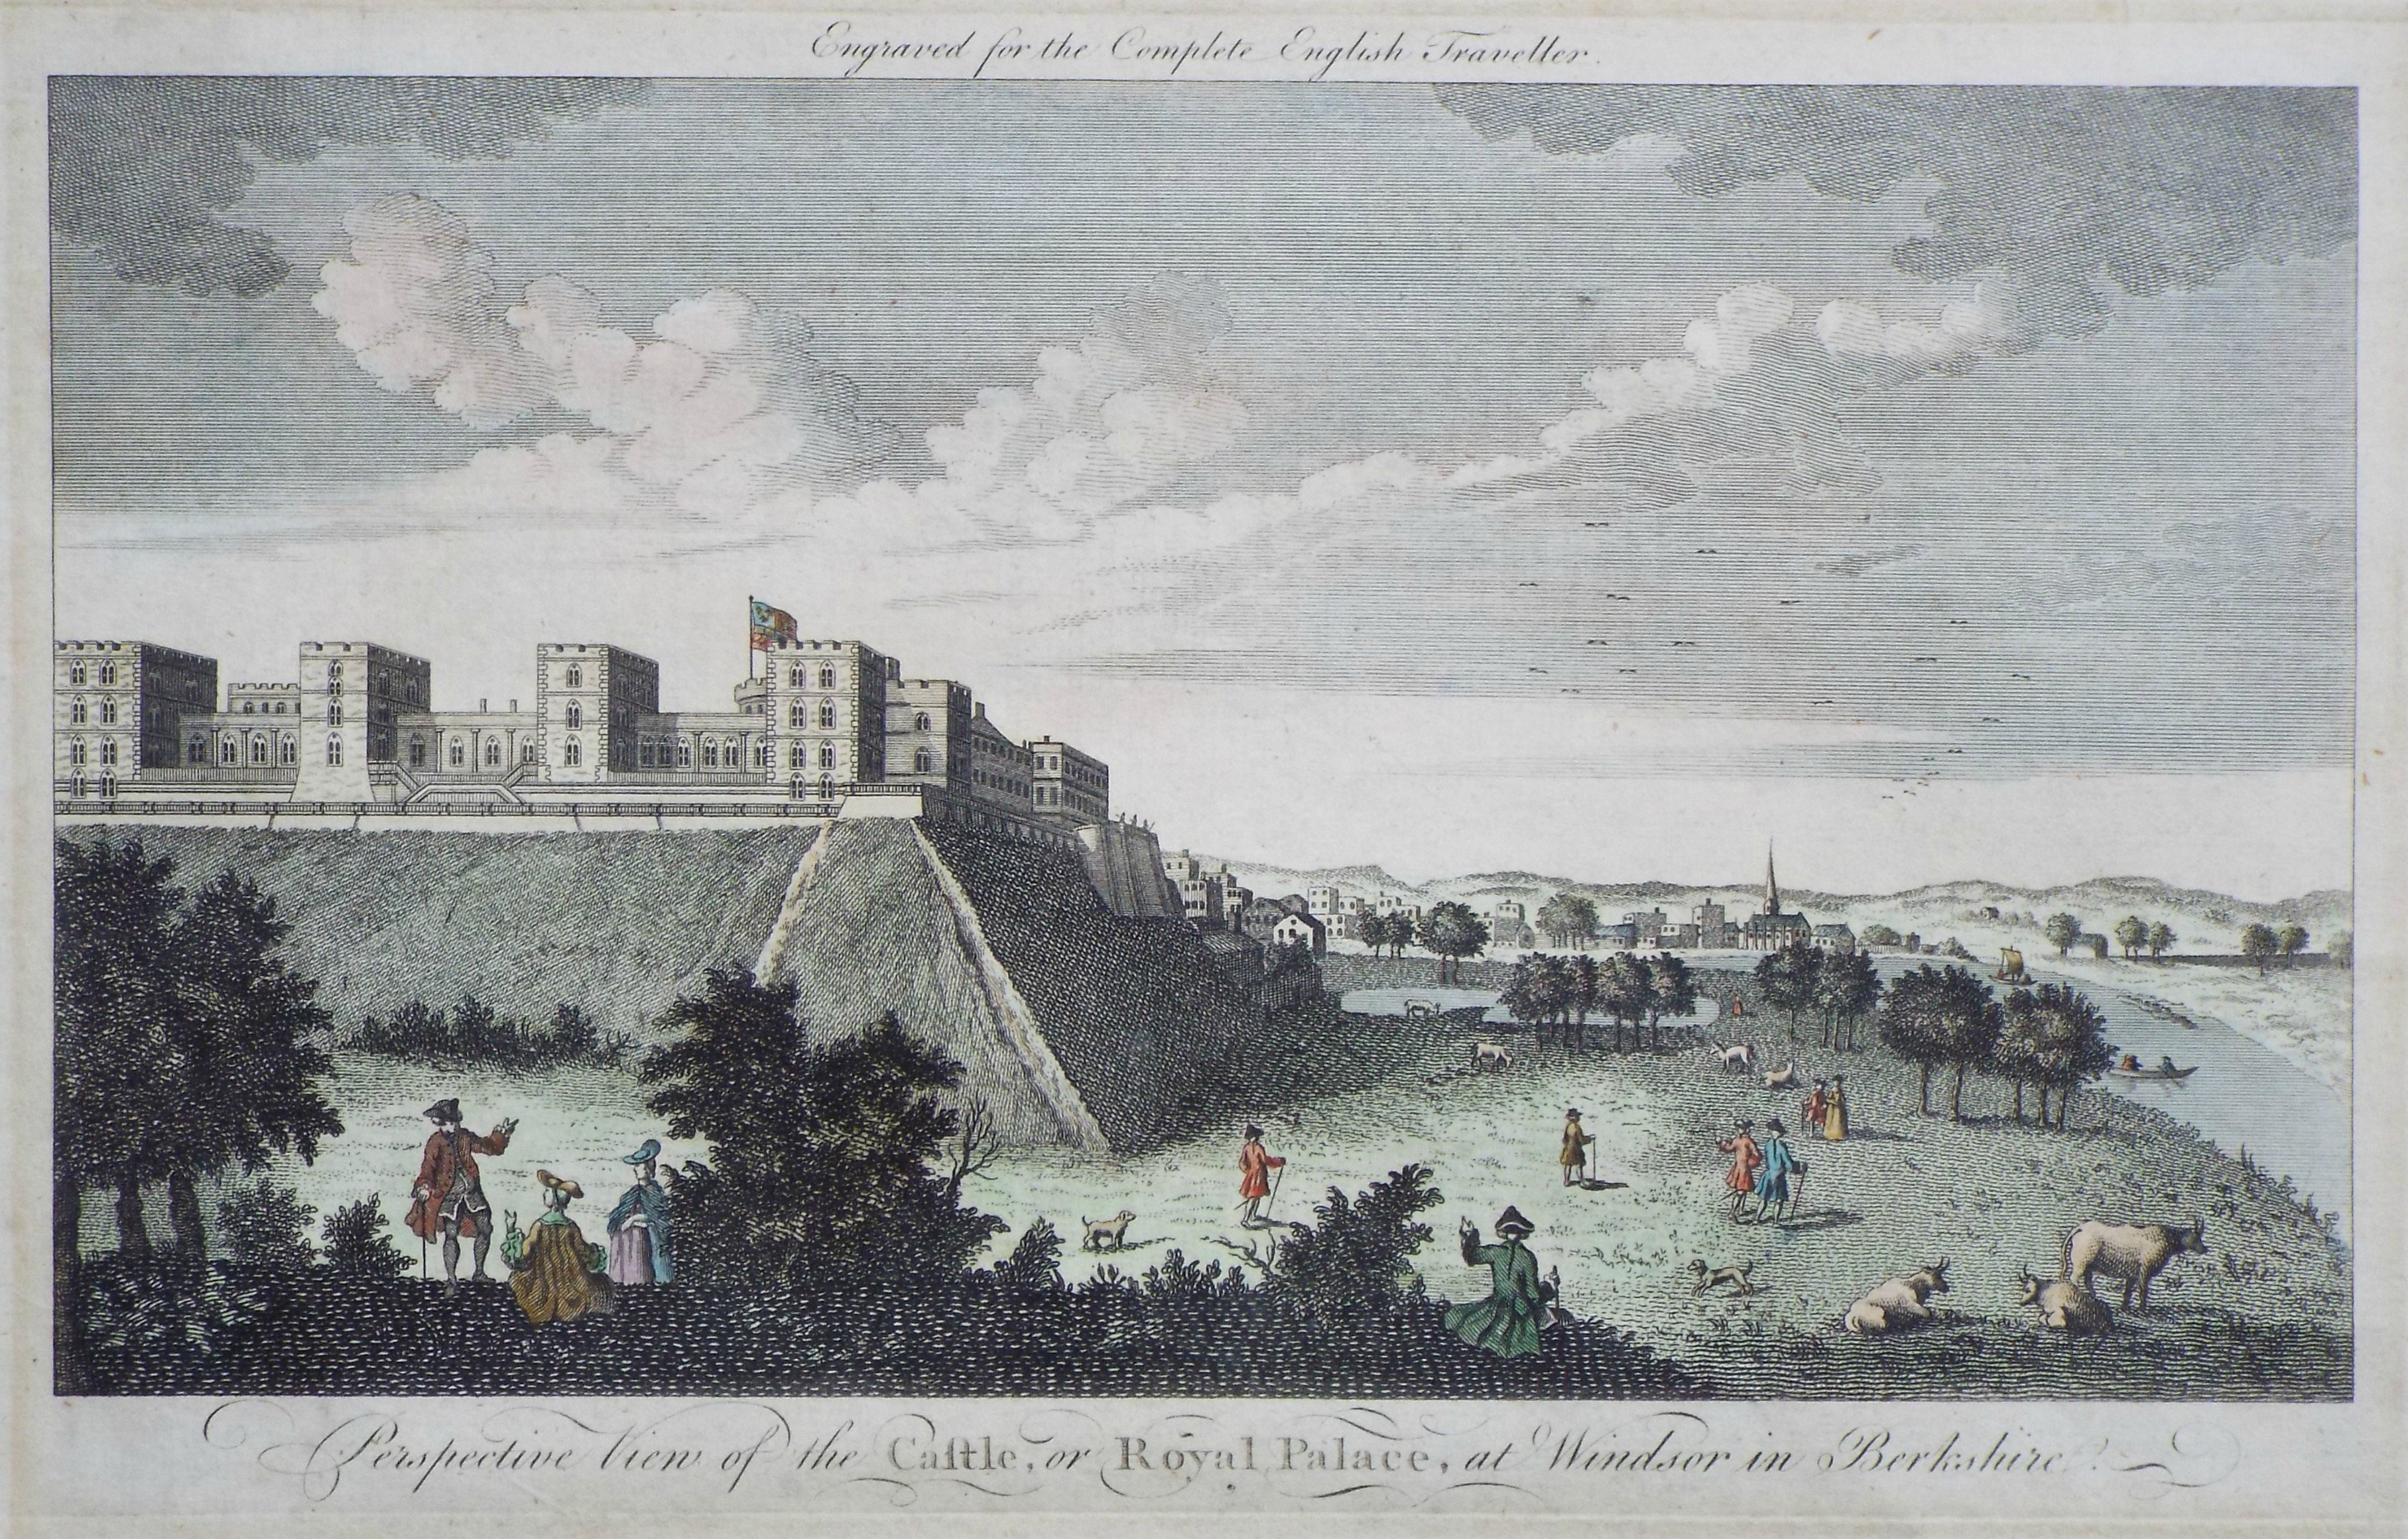 Print - Perspective View of the Castle, or Royal Palace, at Windsor in Berkshire.